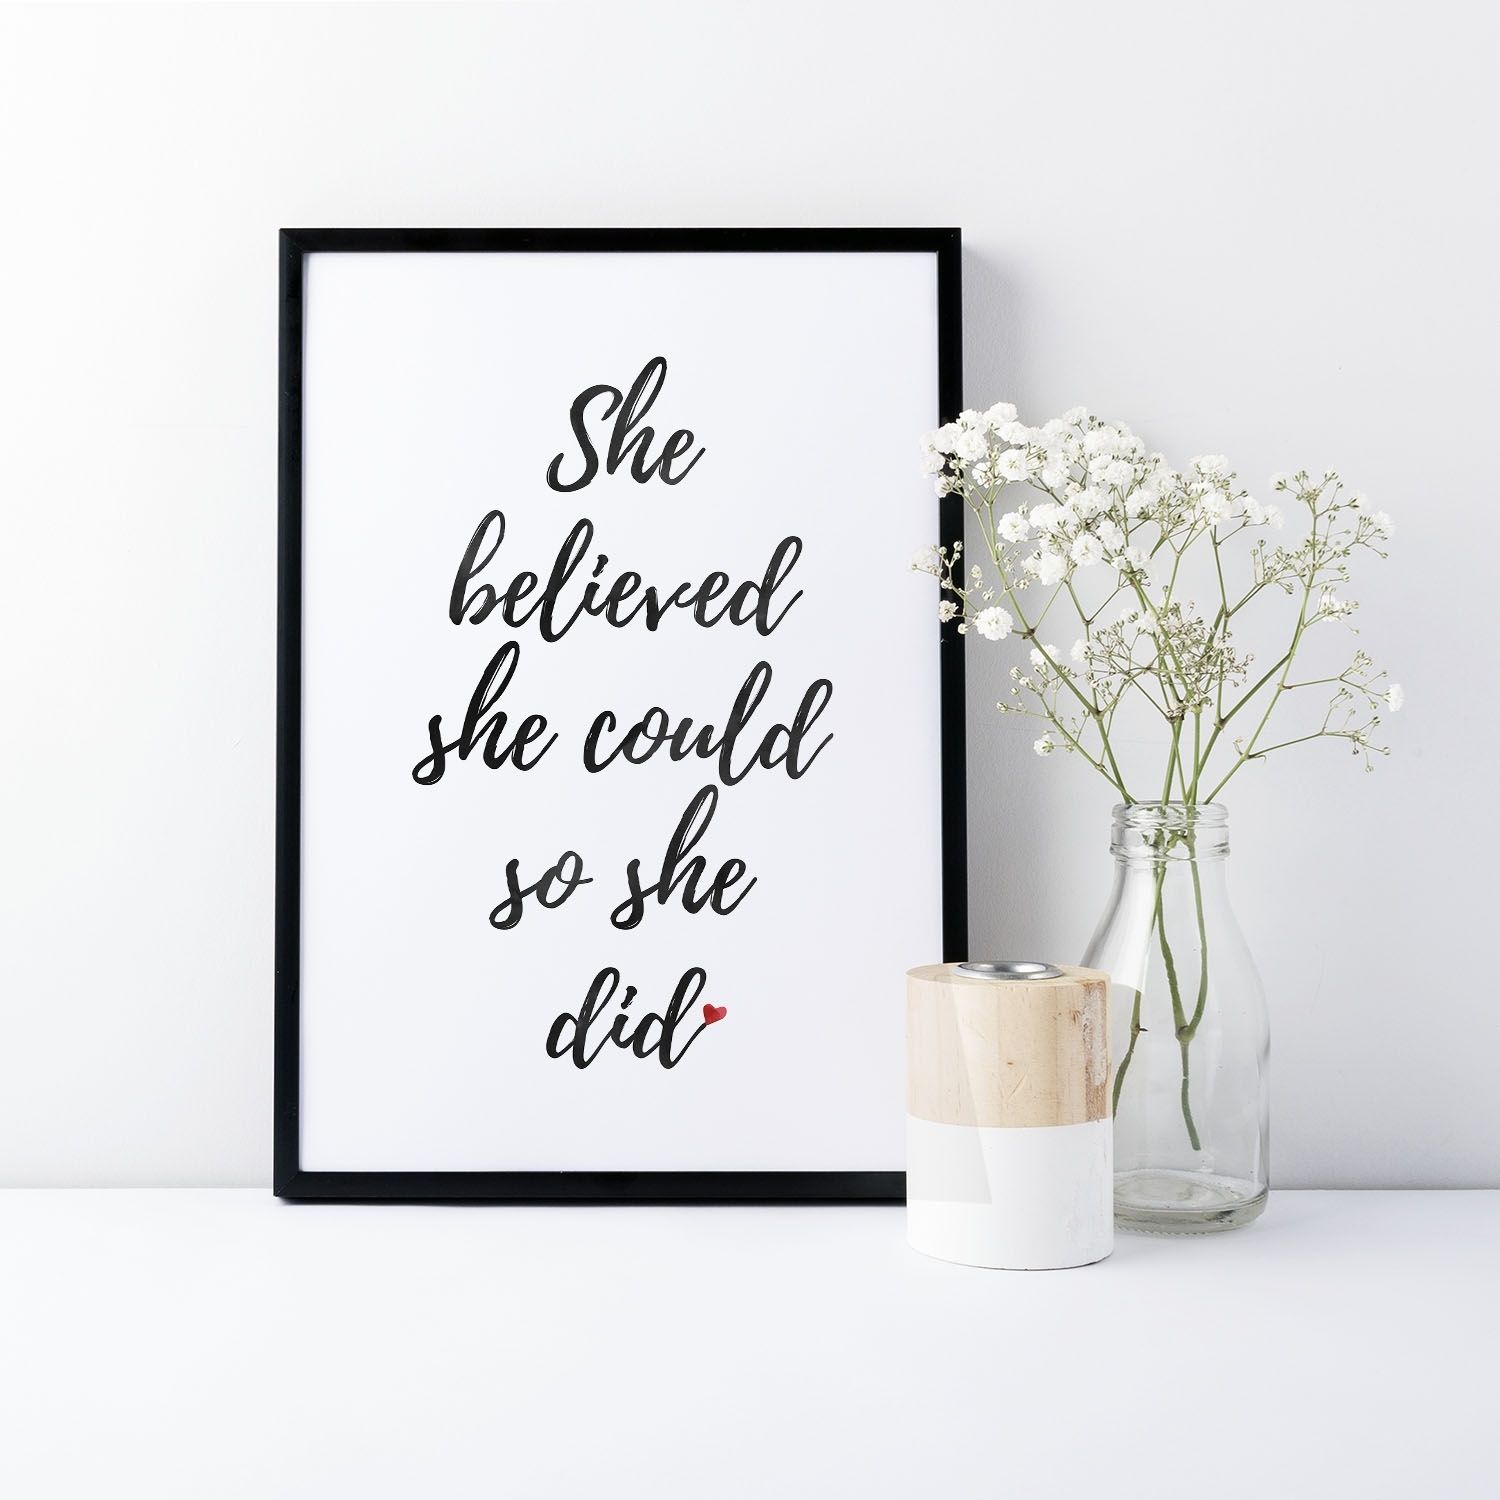 She Believed She Could So She Did' Quote Print Wall Art – Devon Boutique Inside Most Recent She Believed She Could So She Did Wall Art (View 1 of 20)